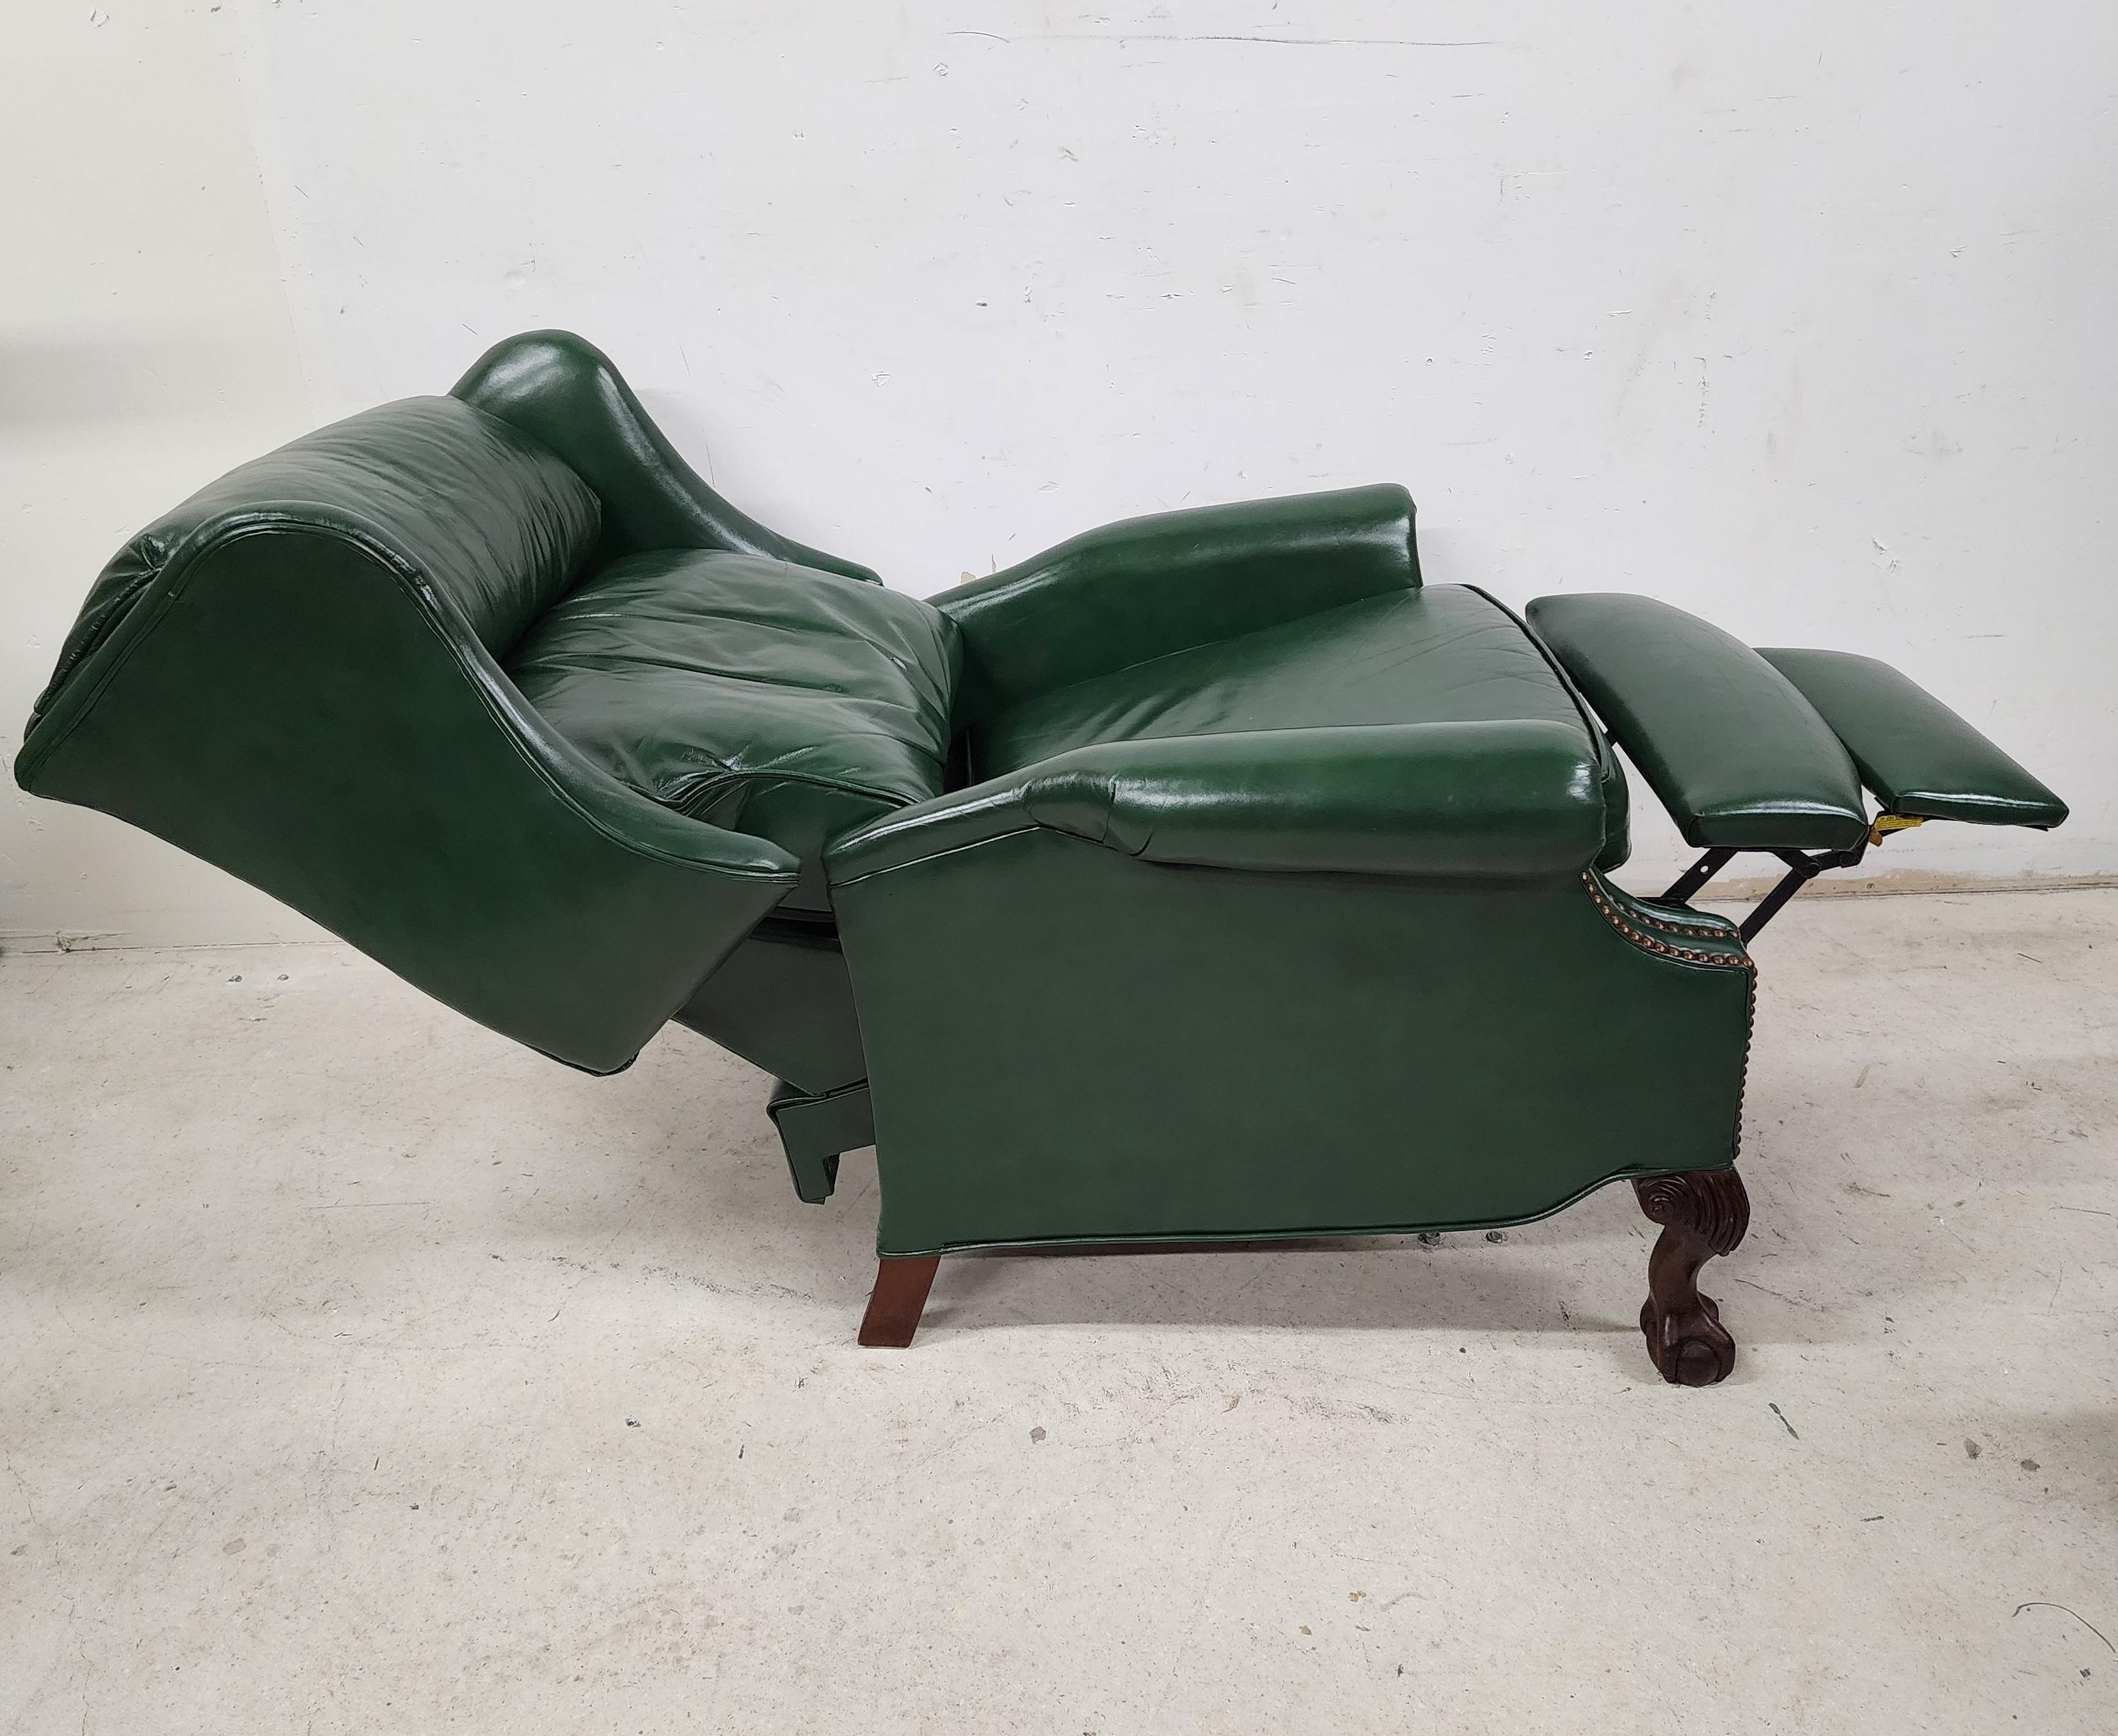 Offering one of our recent palm beach estate fine furniture acquisitions of a
exceptional set of 2 reclining leather chairs 